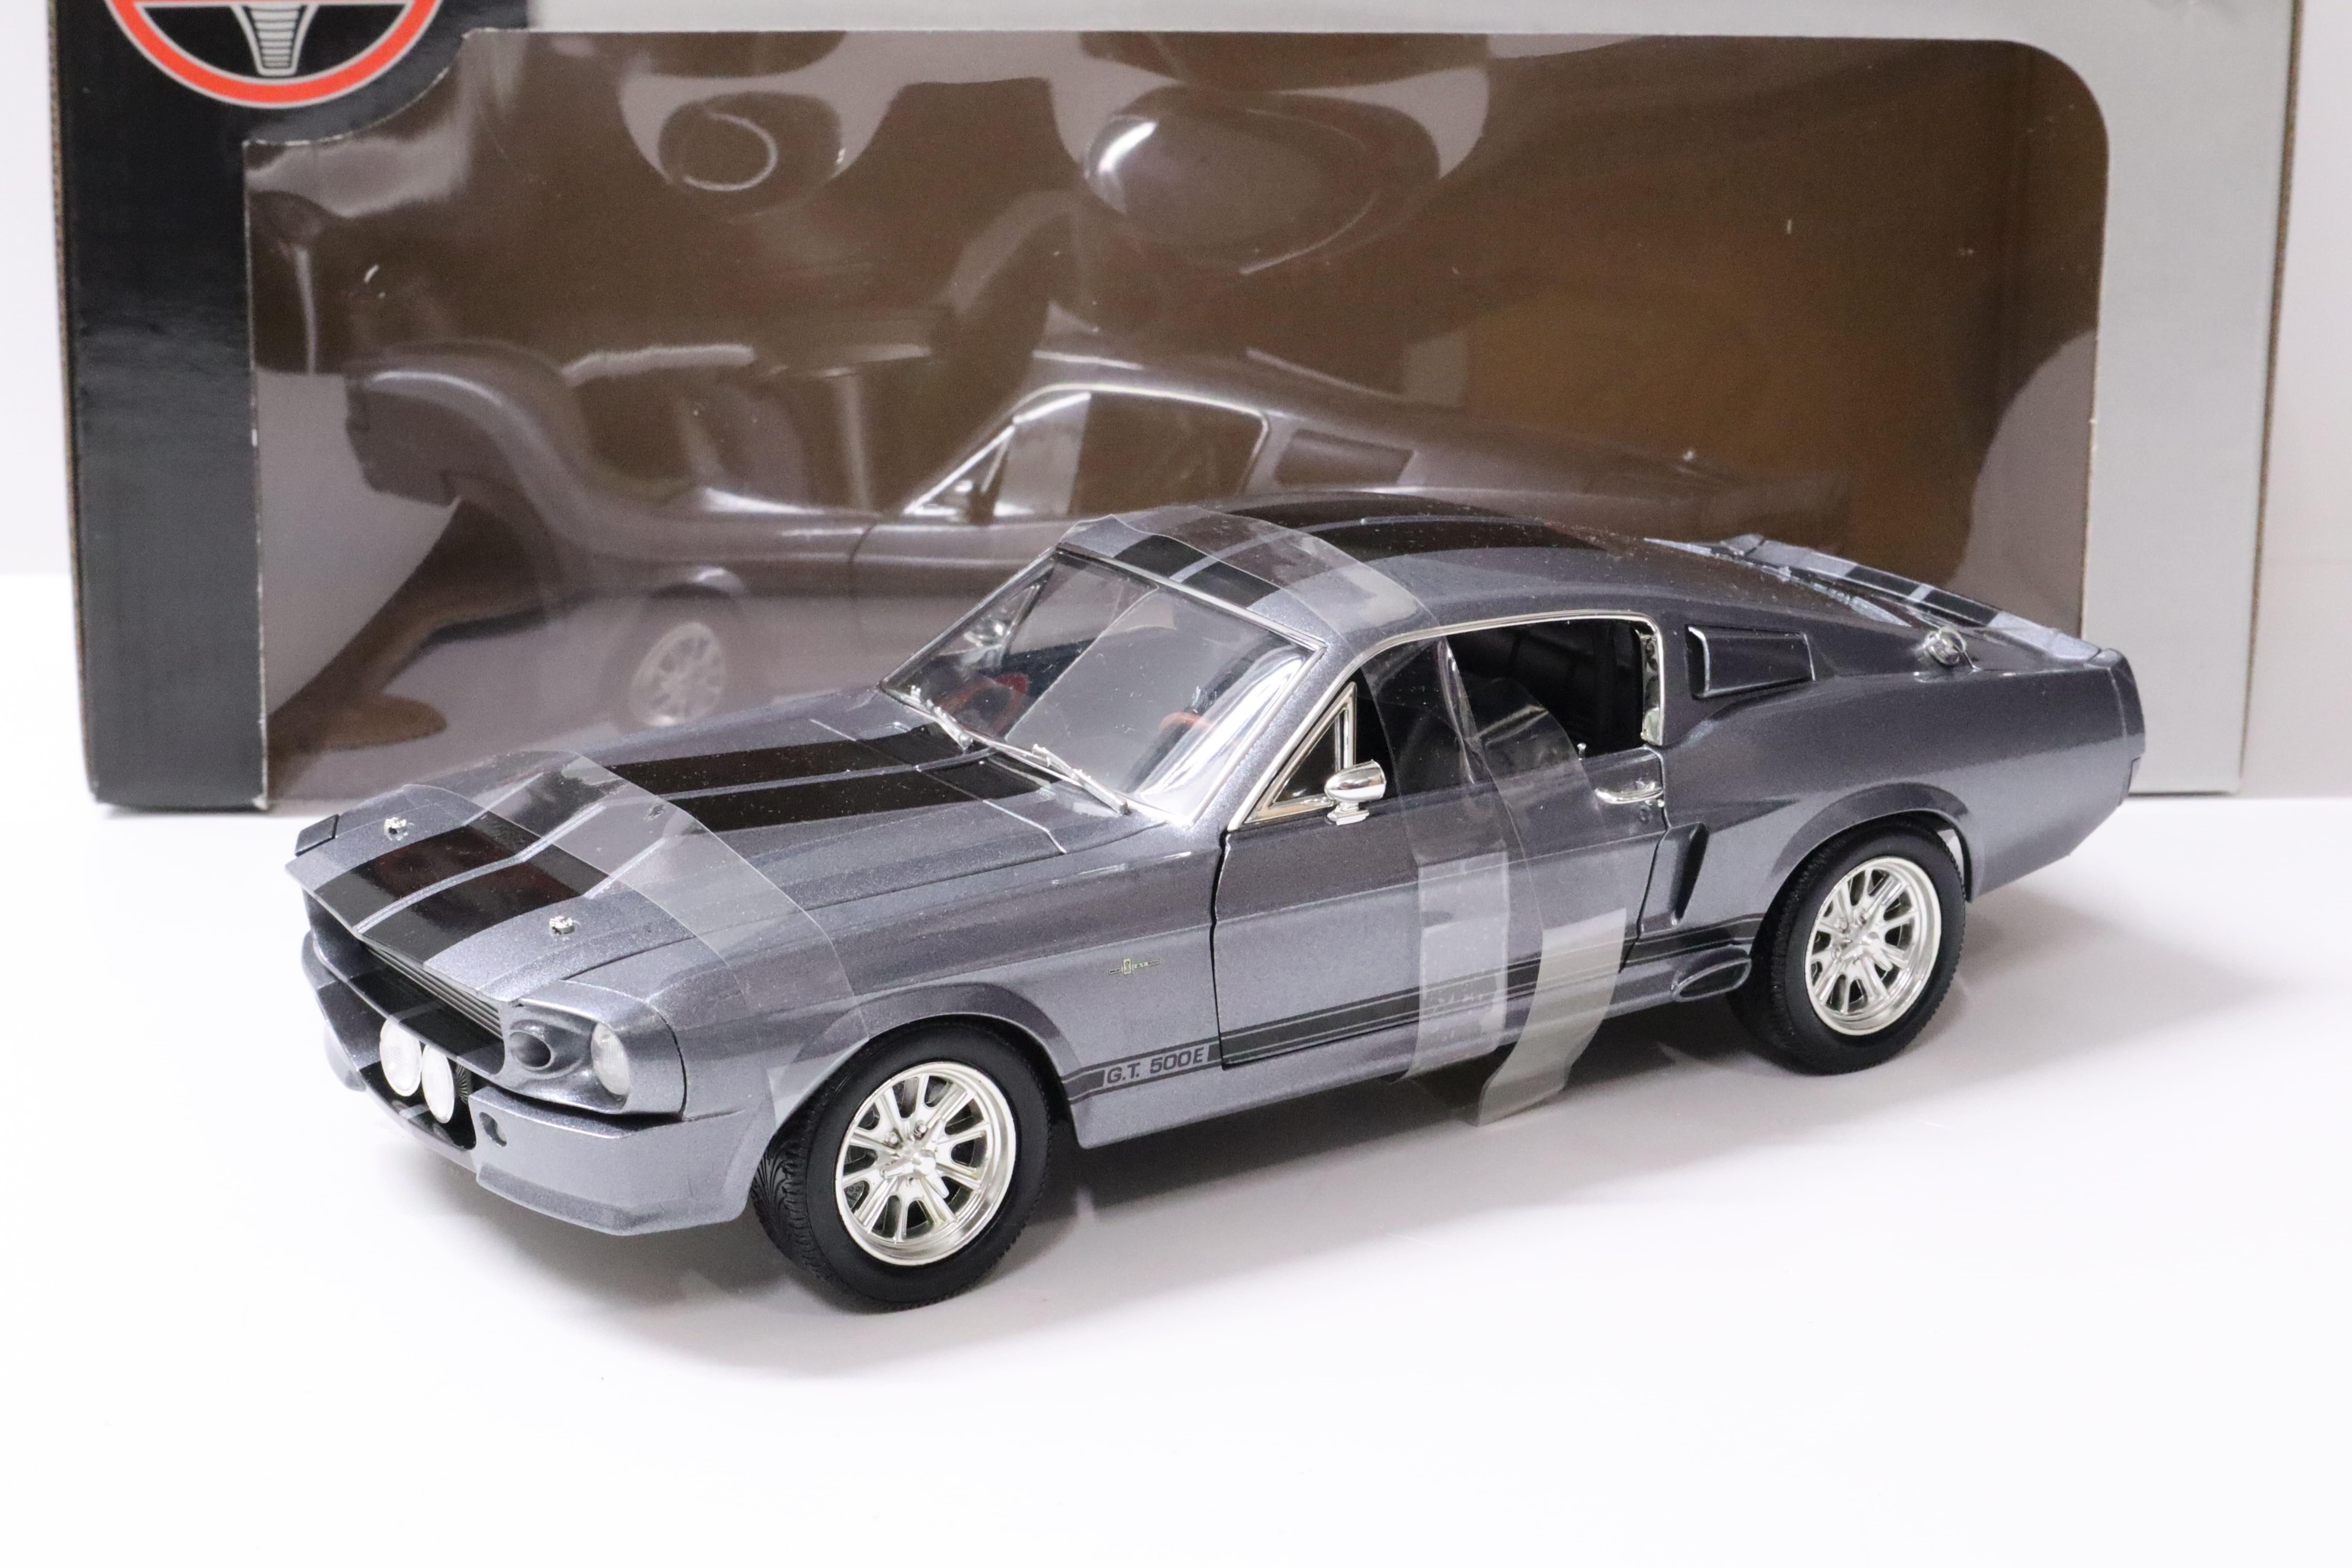 1:18 Shelby Collectibles 1967 Shelby GT 500E ELEANOR grey metallic/ black stripes